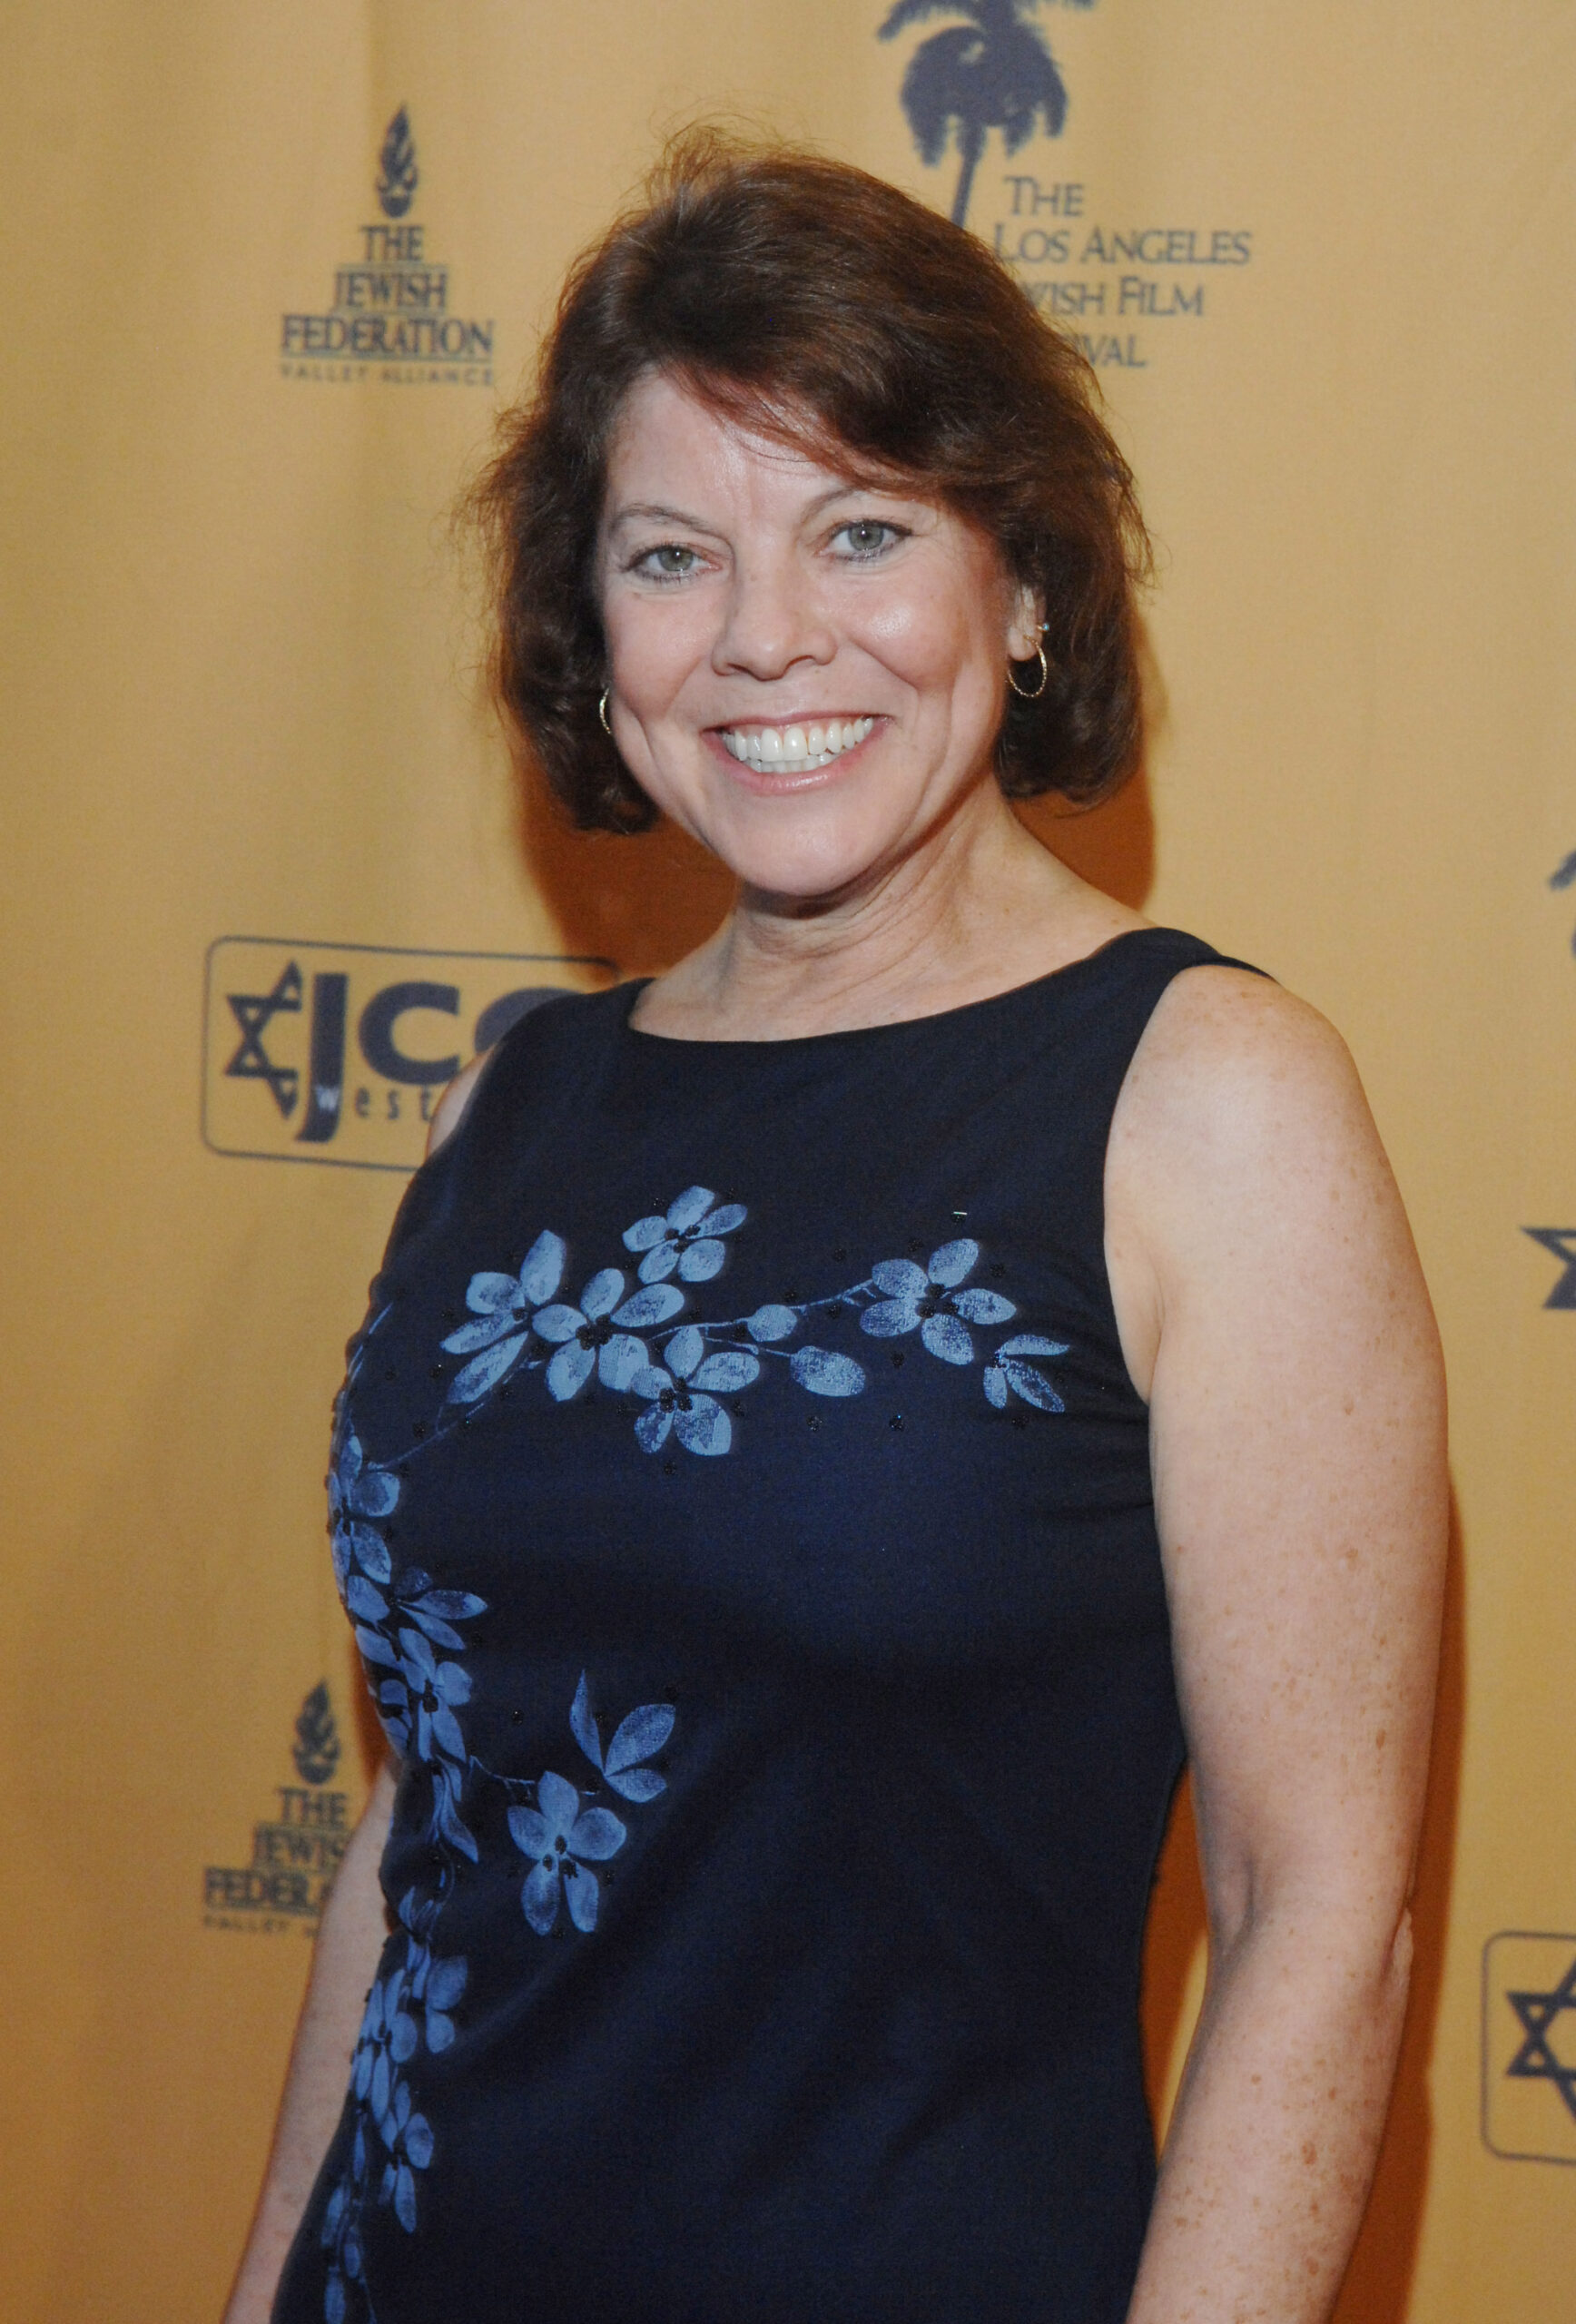 Erin Moran at the 4th Annual LA Jewish Film Festival Opening Night Gala Event on April 23, 2009, in Beverly Hills, California | Source: Getty Images